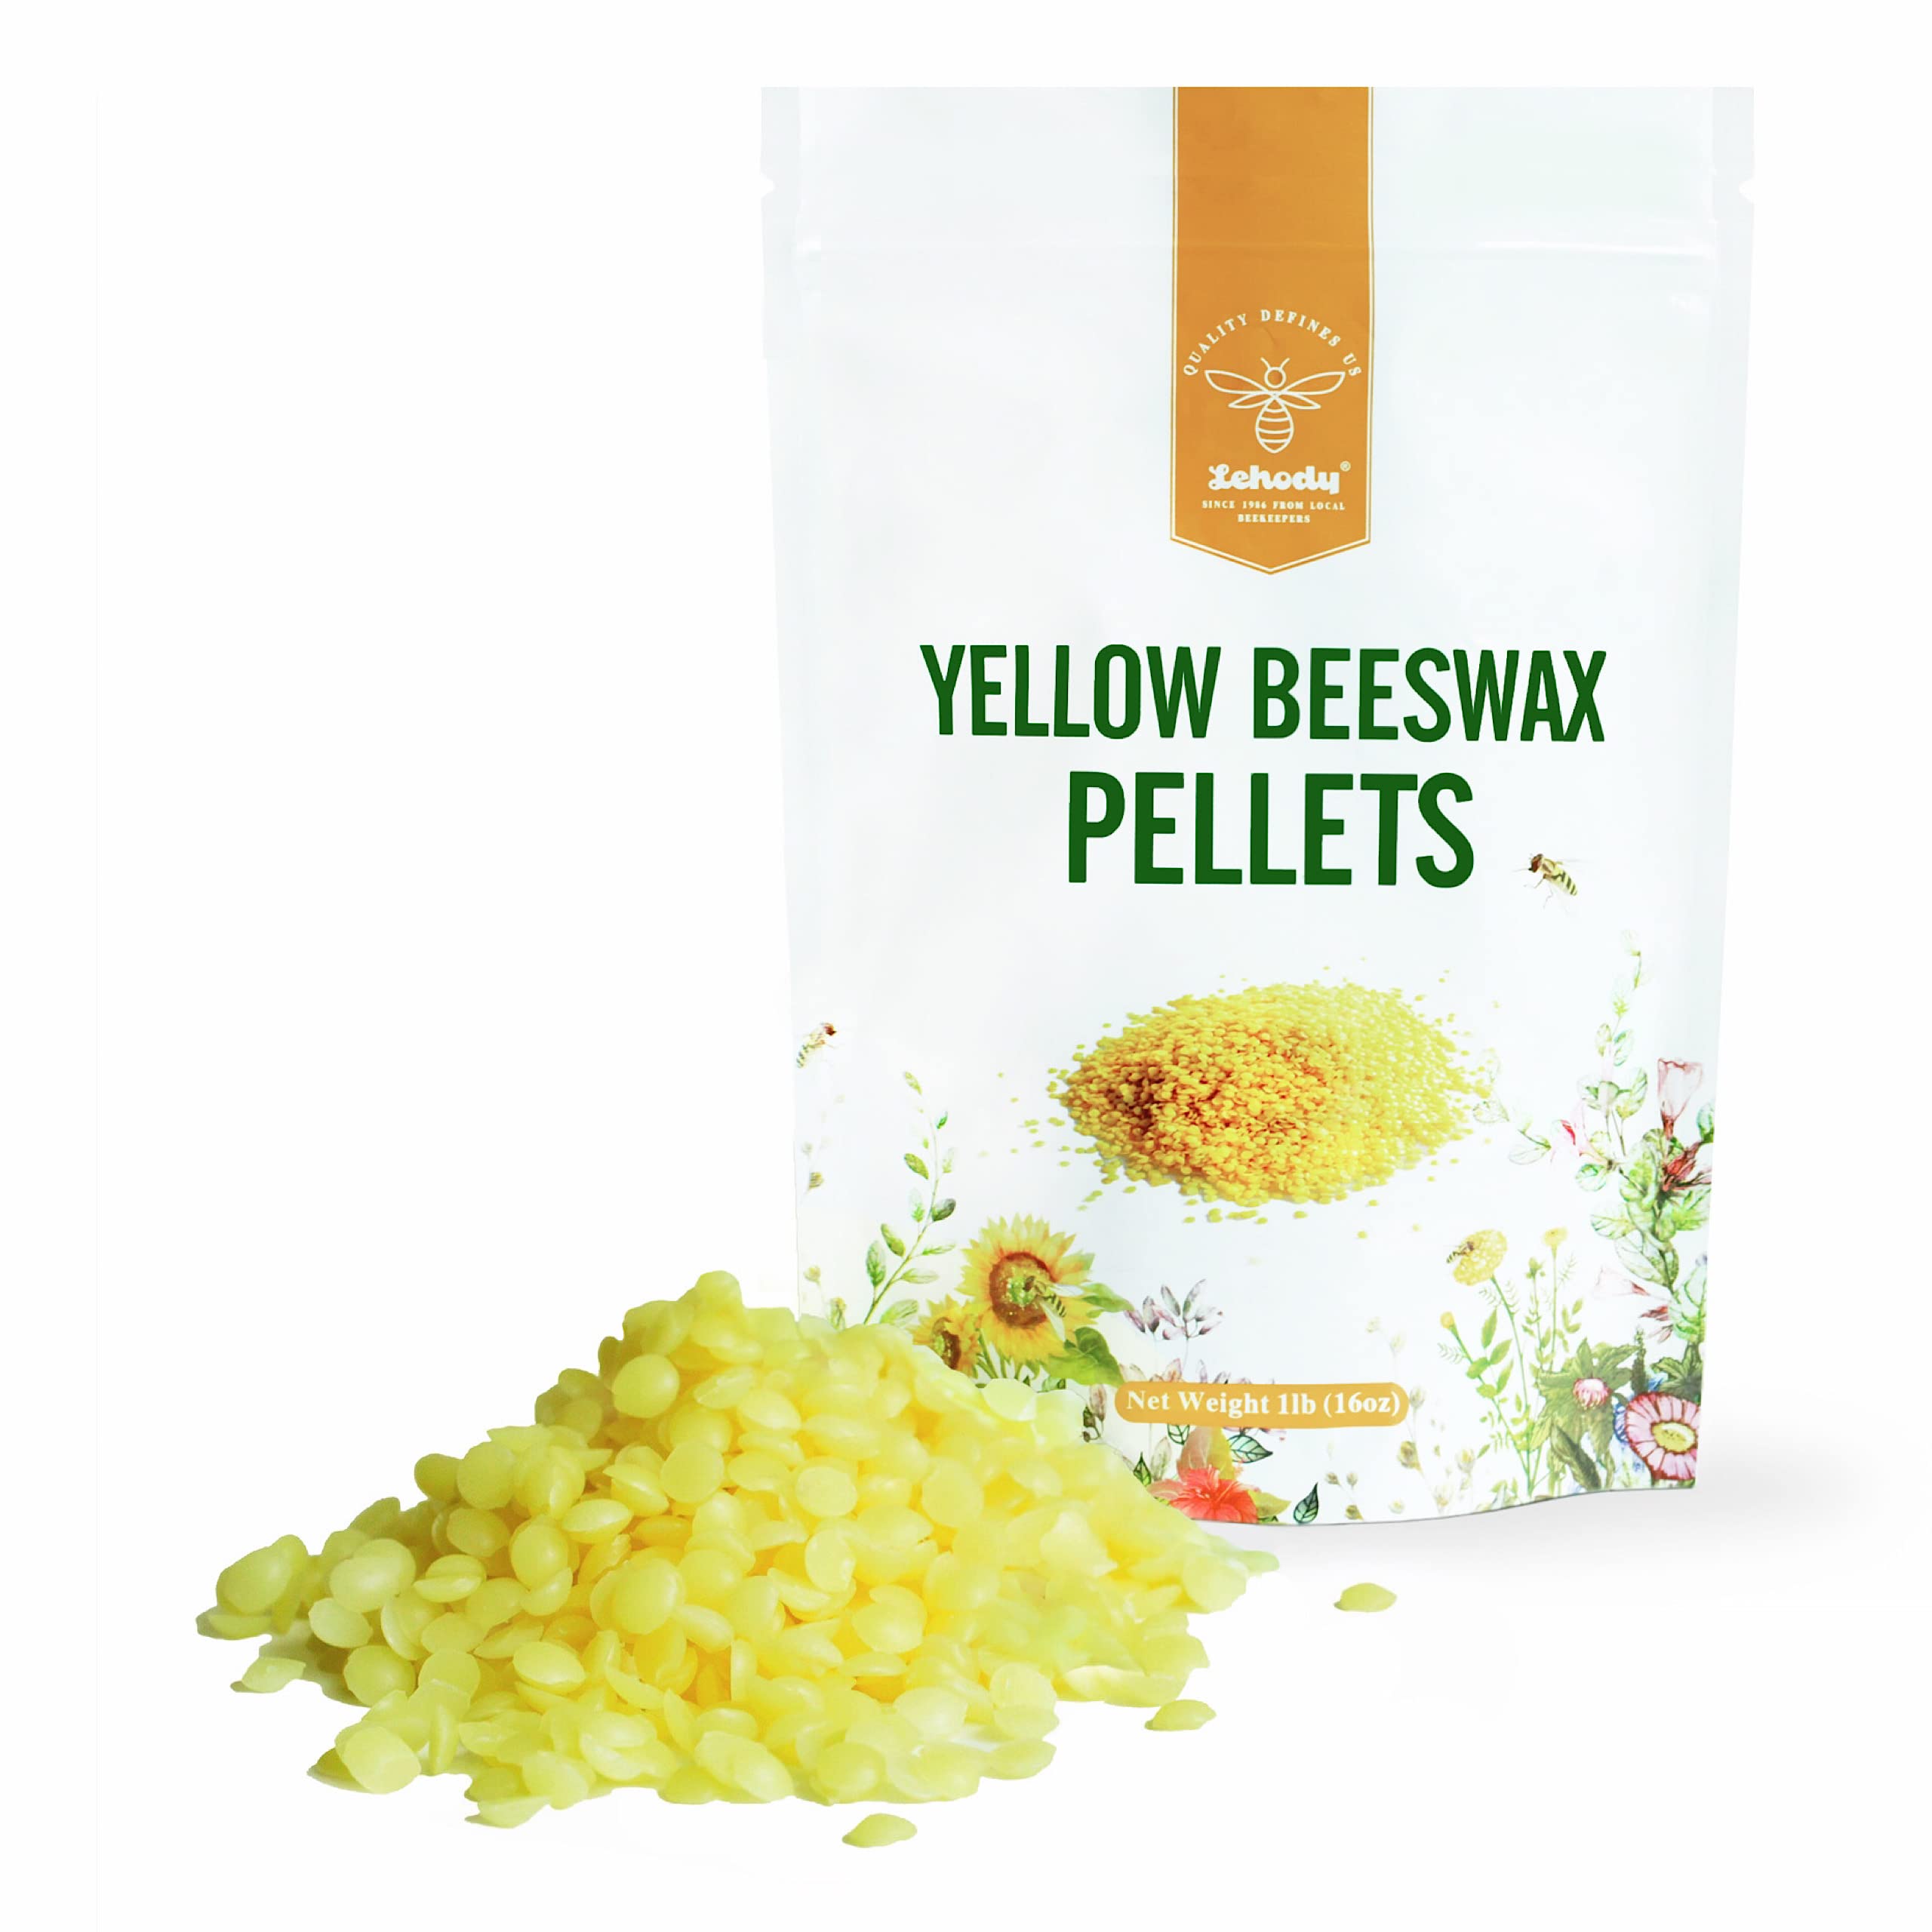 Lehody Natural Yellow Beeswax Pellets 1 Pound - Triple Filtered